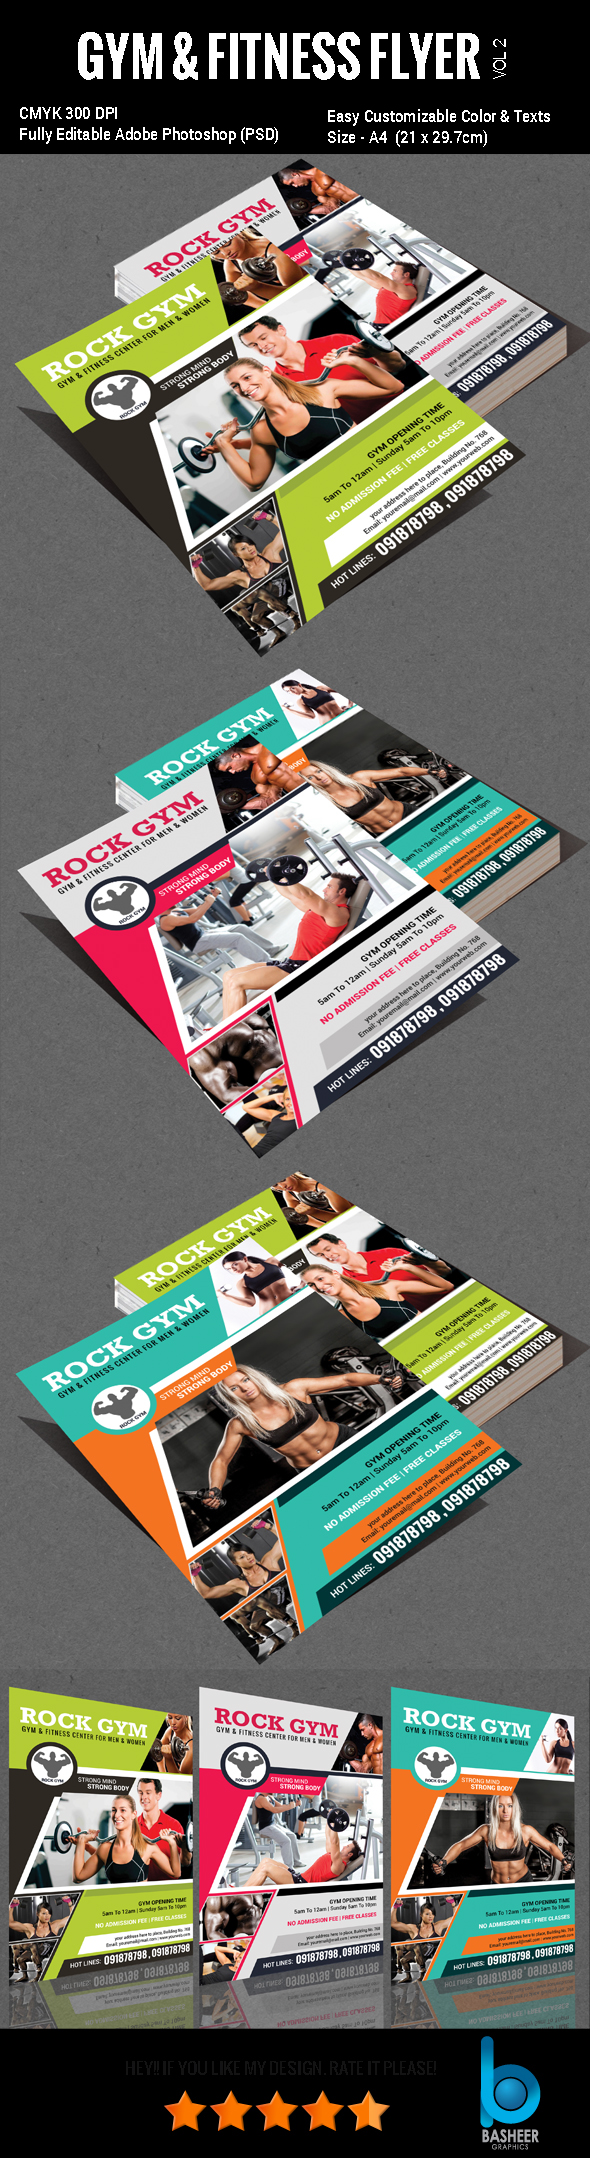 fitness club Health Club a4 flyer athletic body Body Building Show cure diet energy fasting FIT fitness Fitness Center